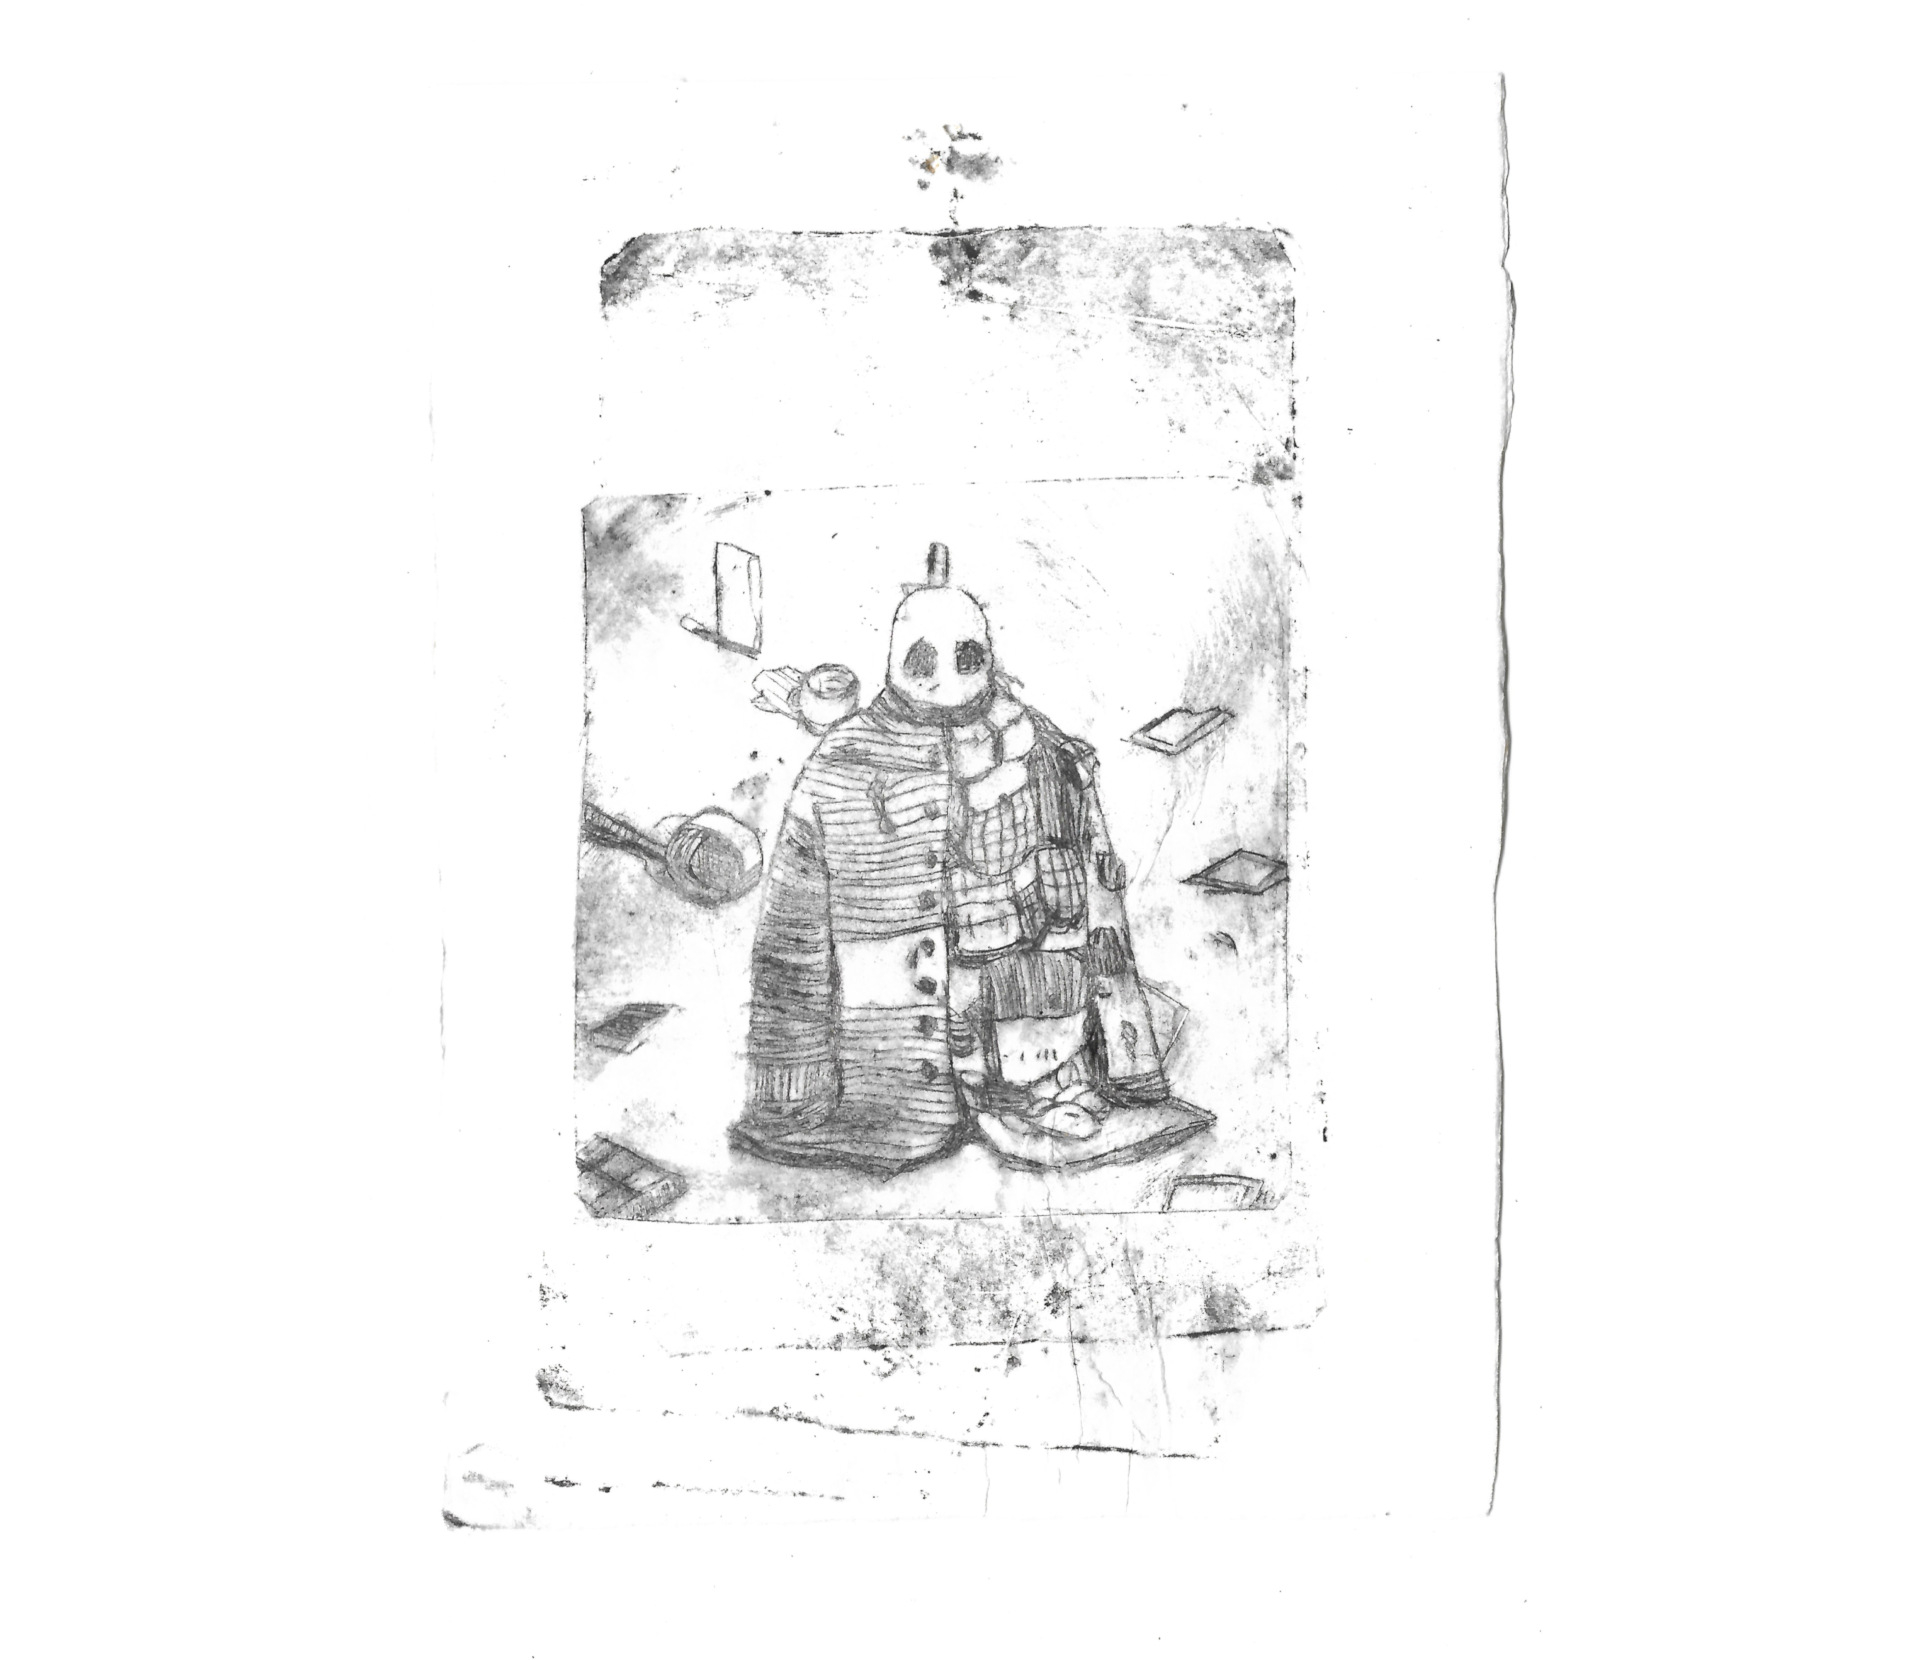 Photo of print showing a jacket and mask amongst scattered items